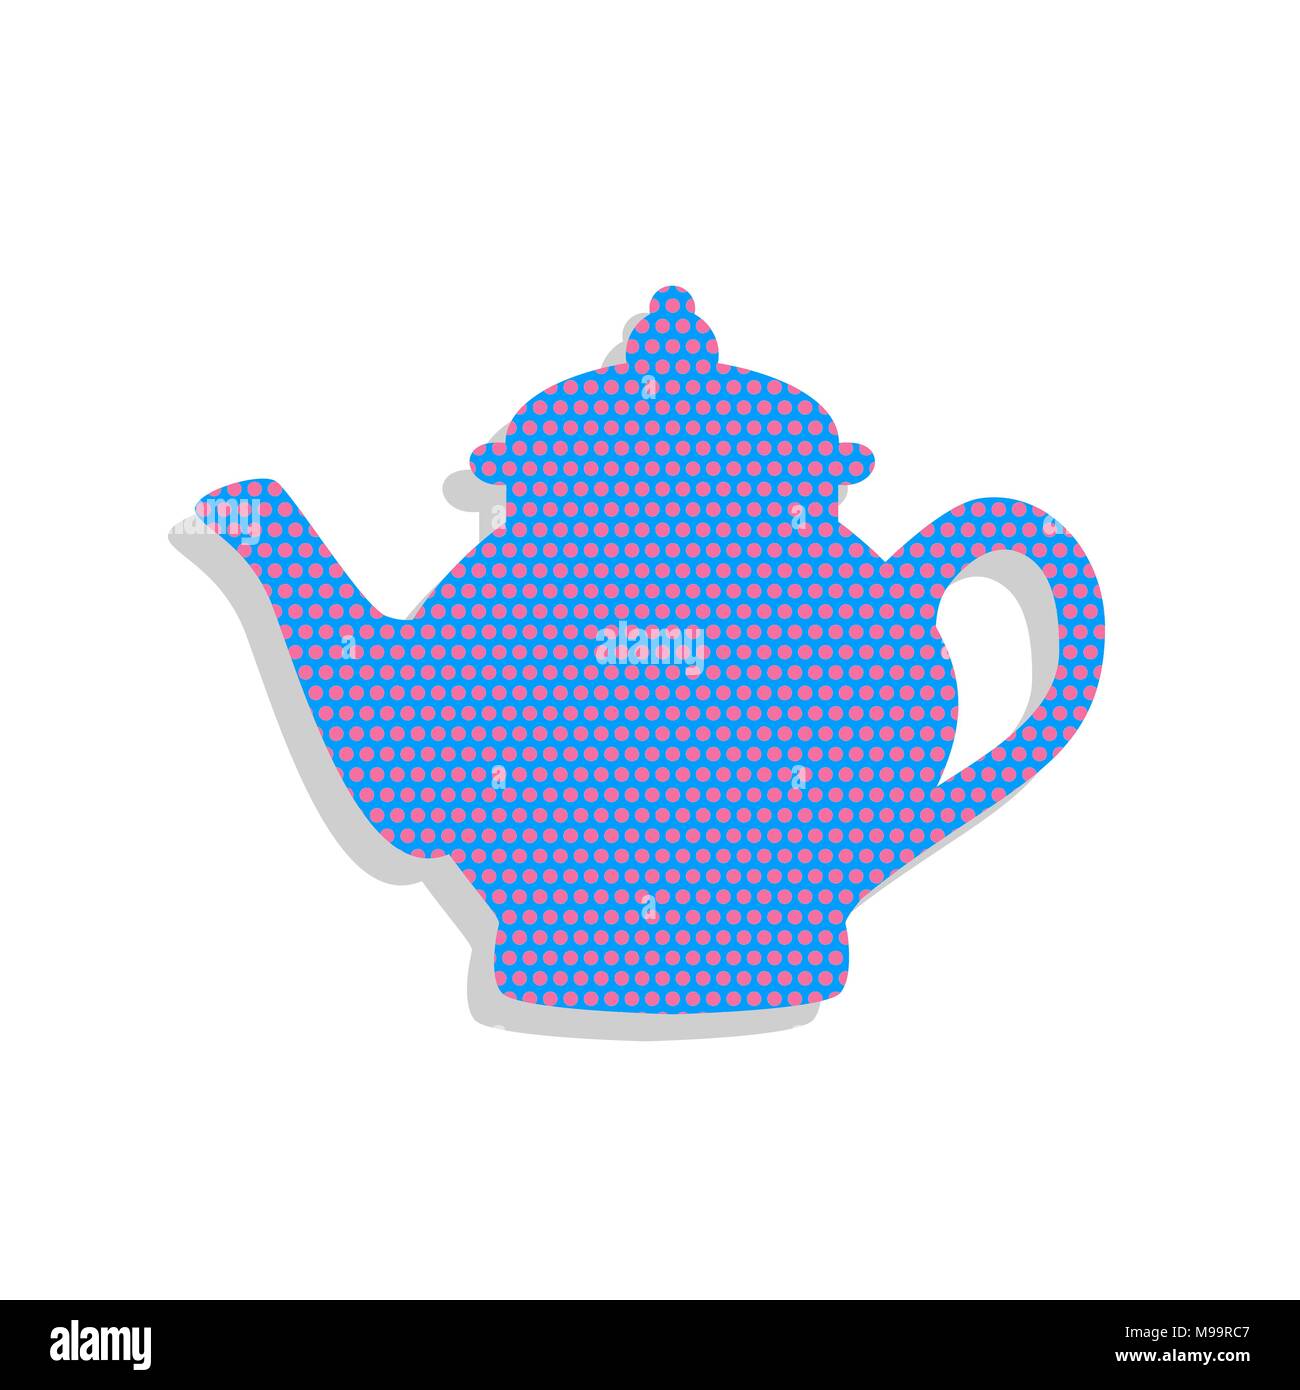 Tea maker sign. Vector. Neon blue icon with cyclamen polka dots pattern with light gray shadow on white background. Isolated. Stock Vector